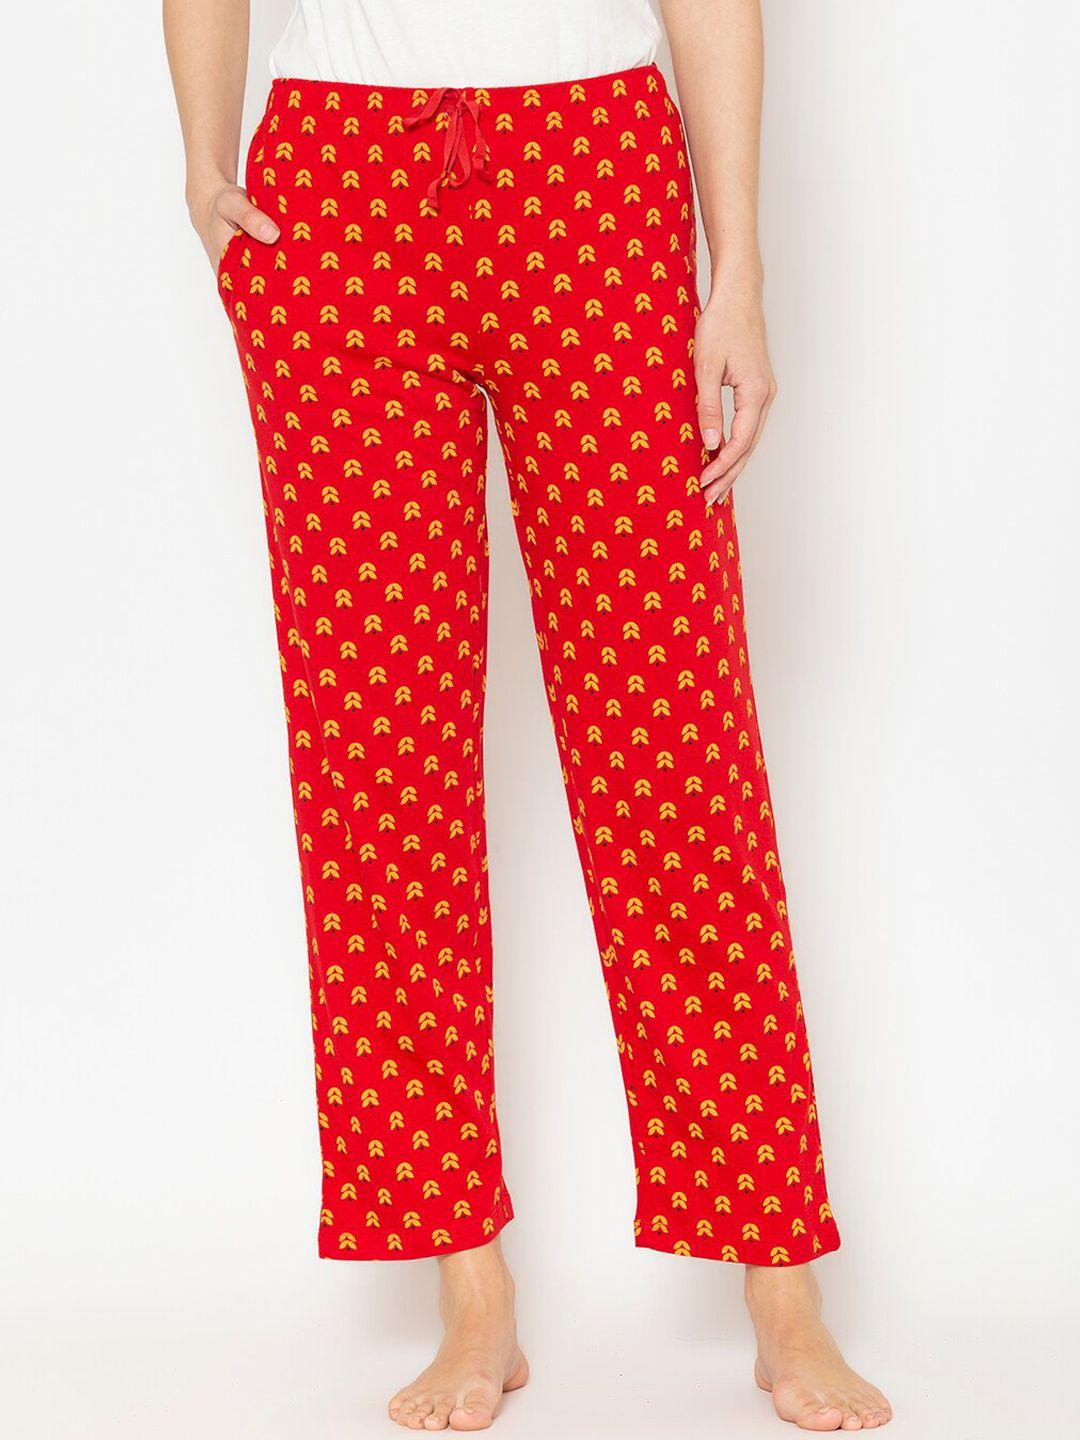 lounge-dreams-women-red-&-yellow-printed-pure-cotton-lounge-pants